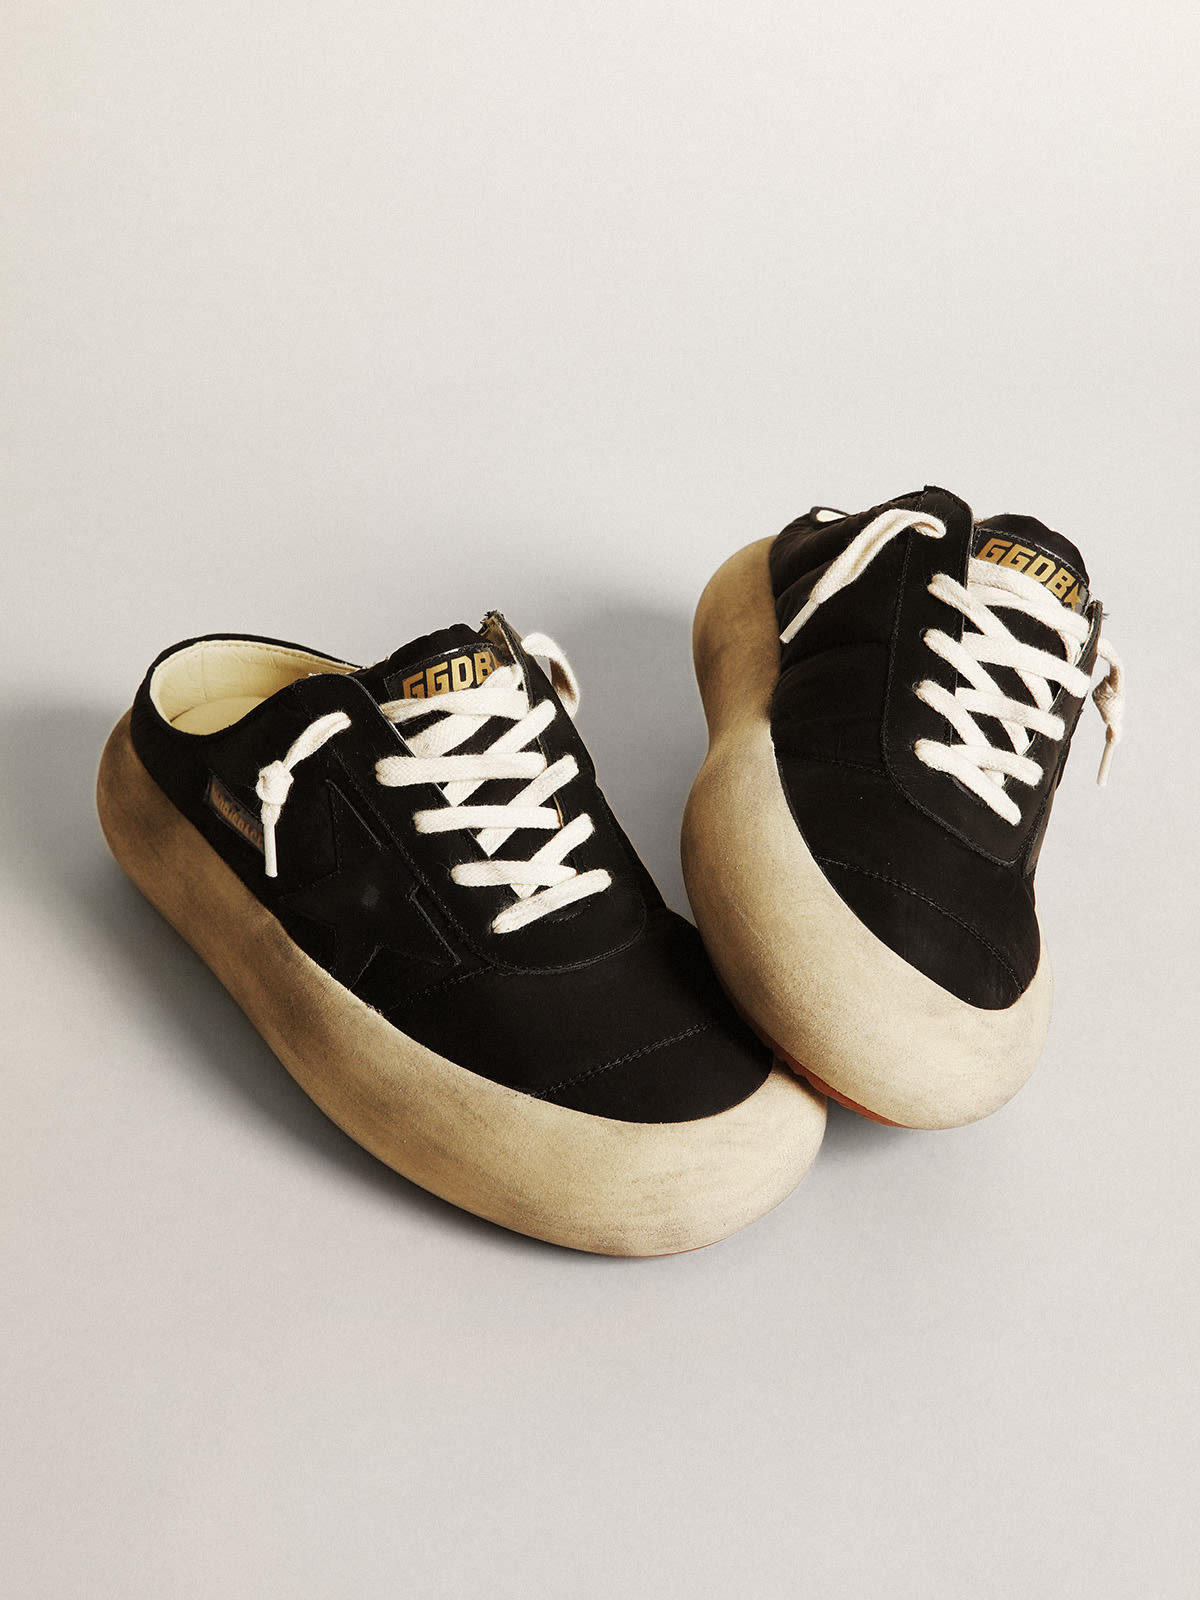 Golden Goose - Women's Space-Star Sabots in black nylon with black leather star in 